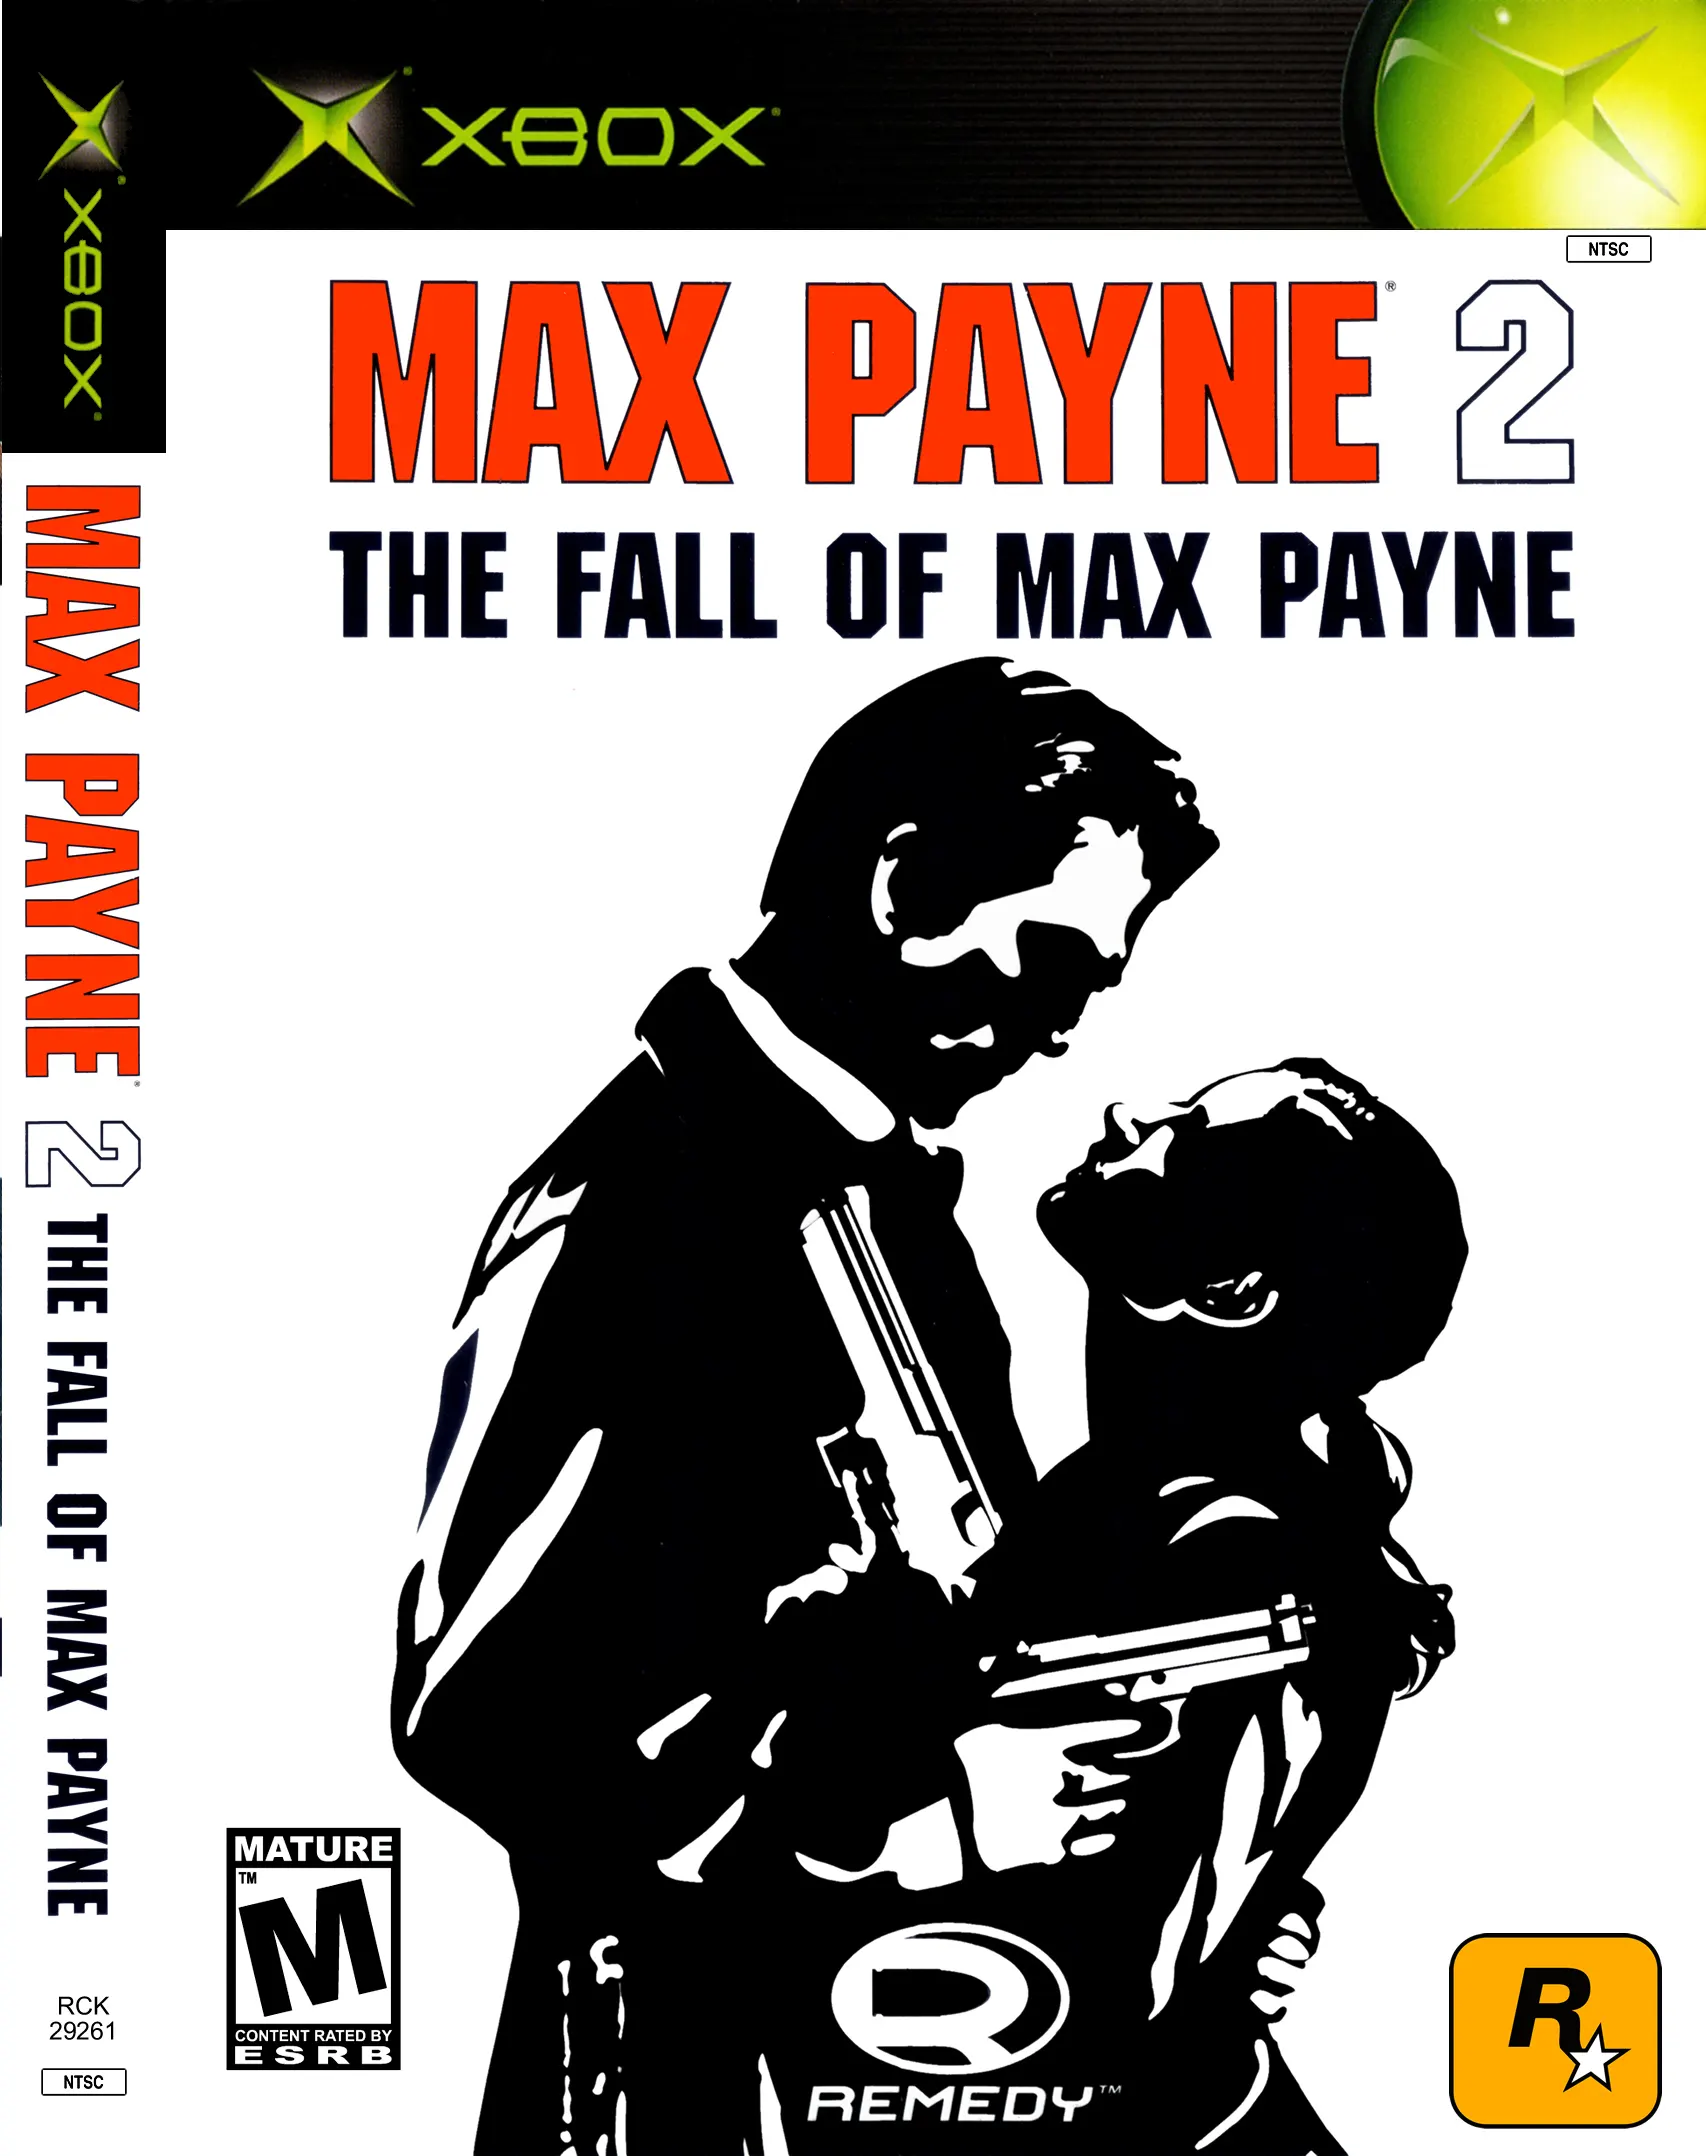 Original Xbox Game Console Max Payne 2: The Fall of Max Payne game box front.